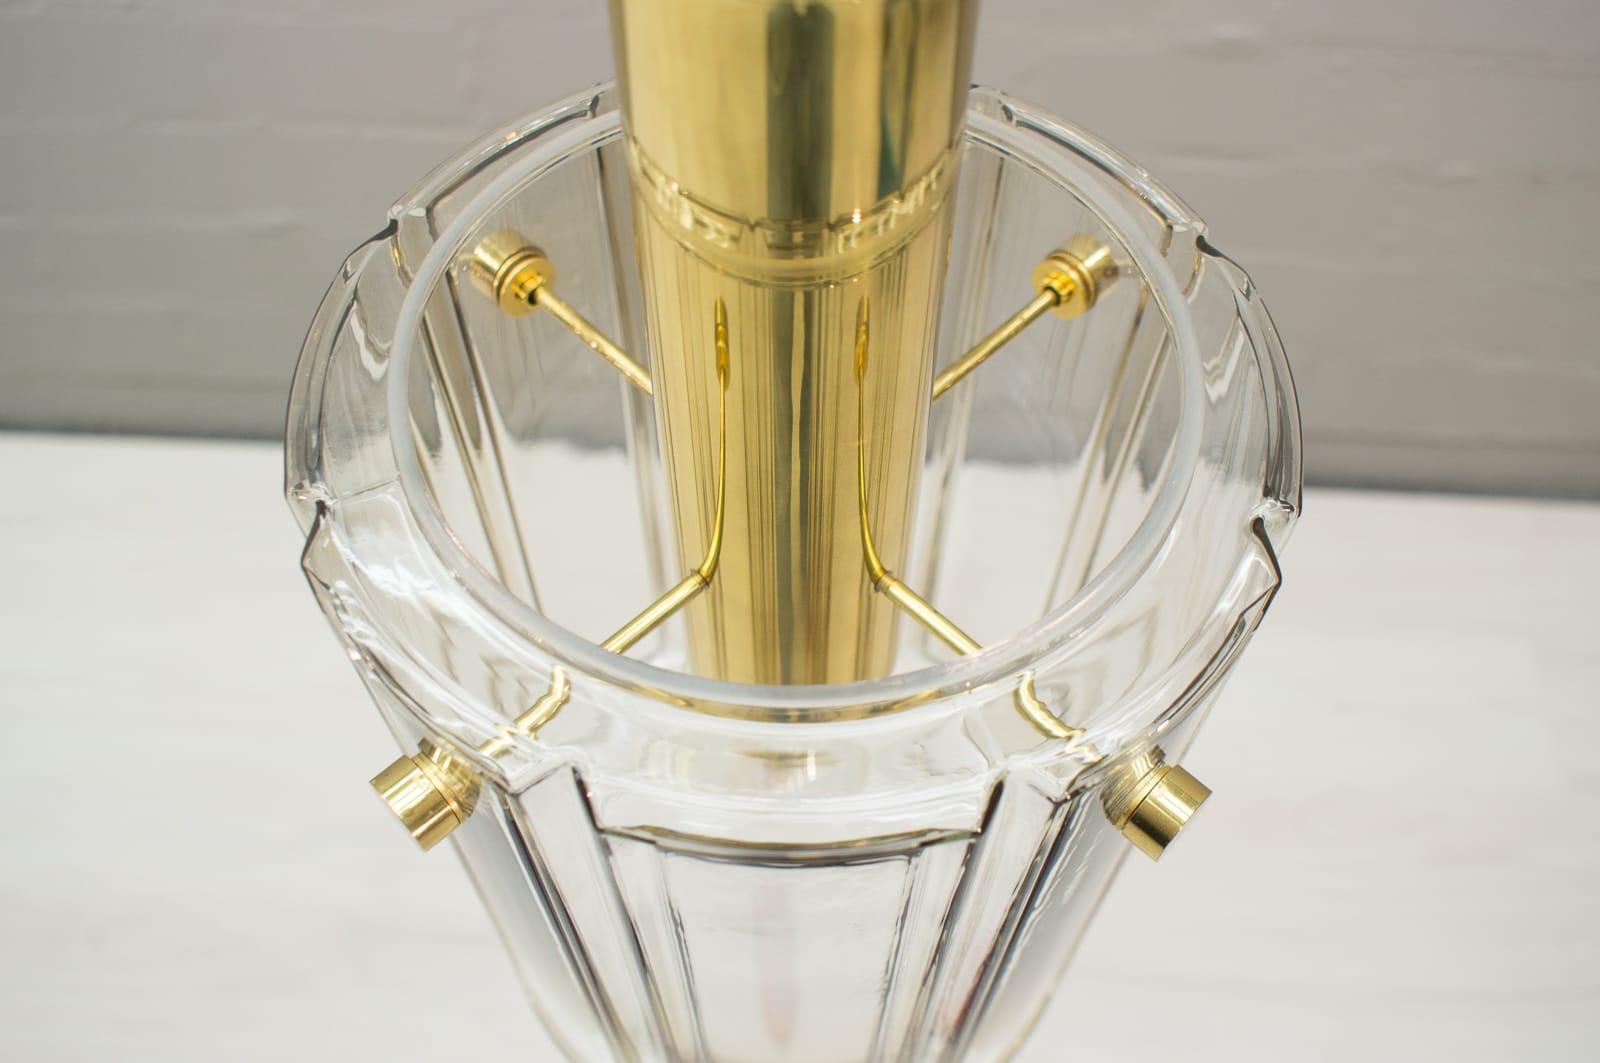 Brass and Smoked Glass Ceiling Lamp from Limburg, Germany, 1960s For Sale 1